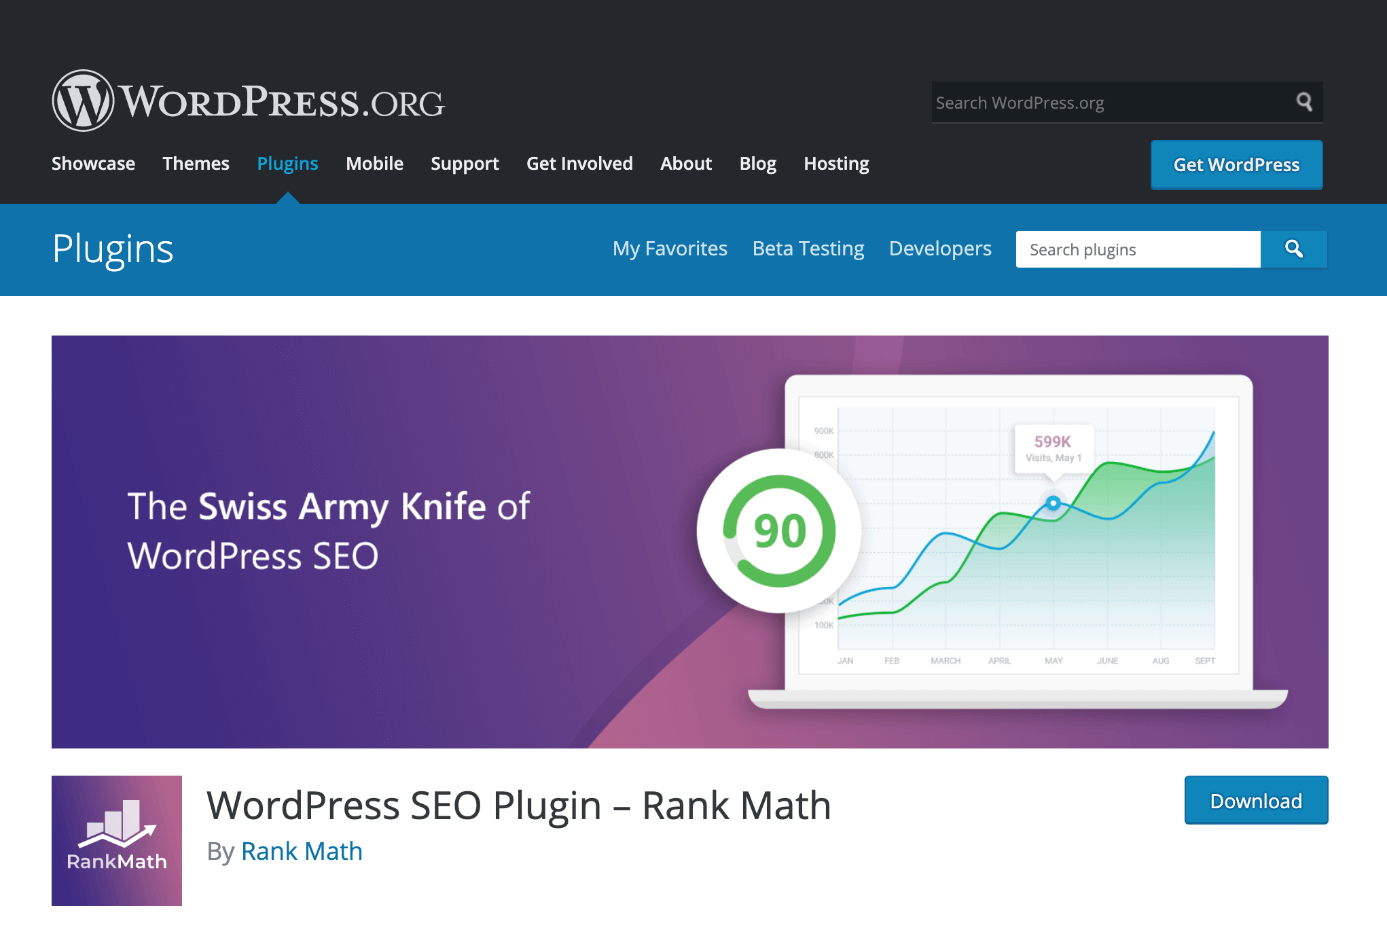 Rank Math SEO plug-in for WordPress, available from WordPress.org